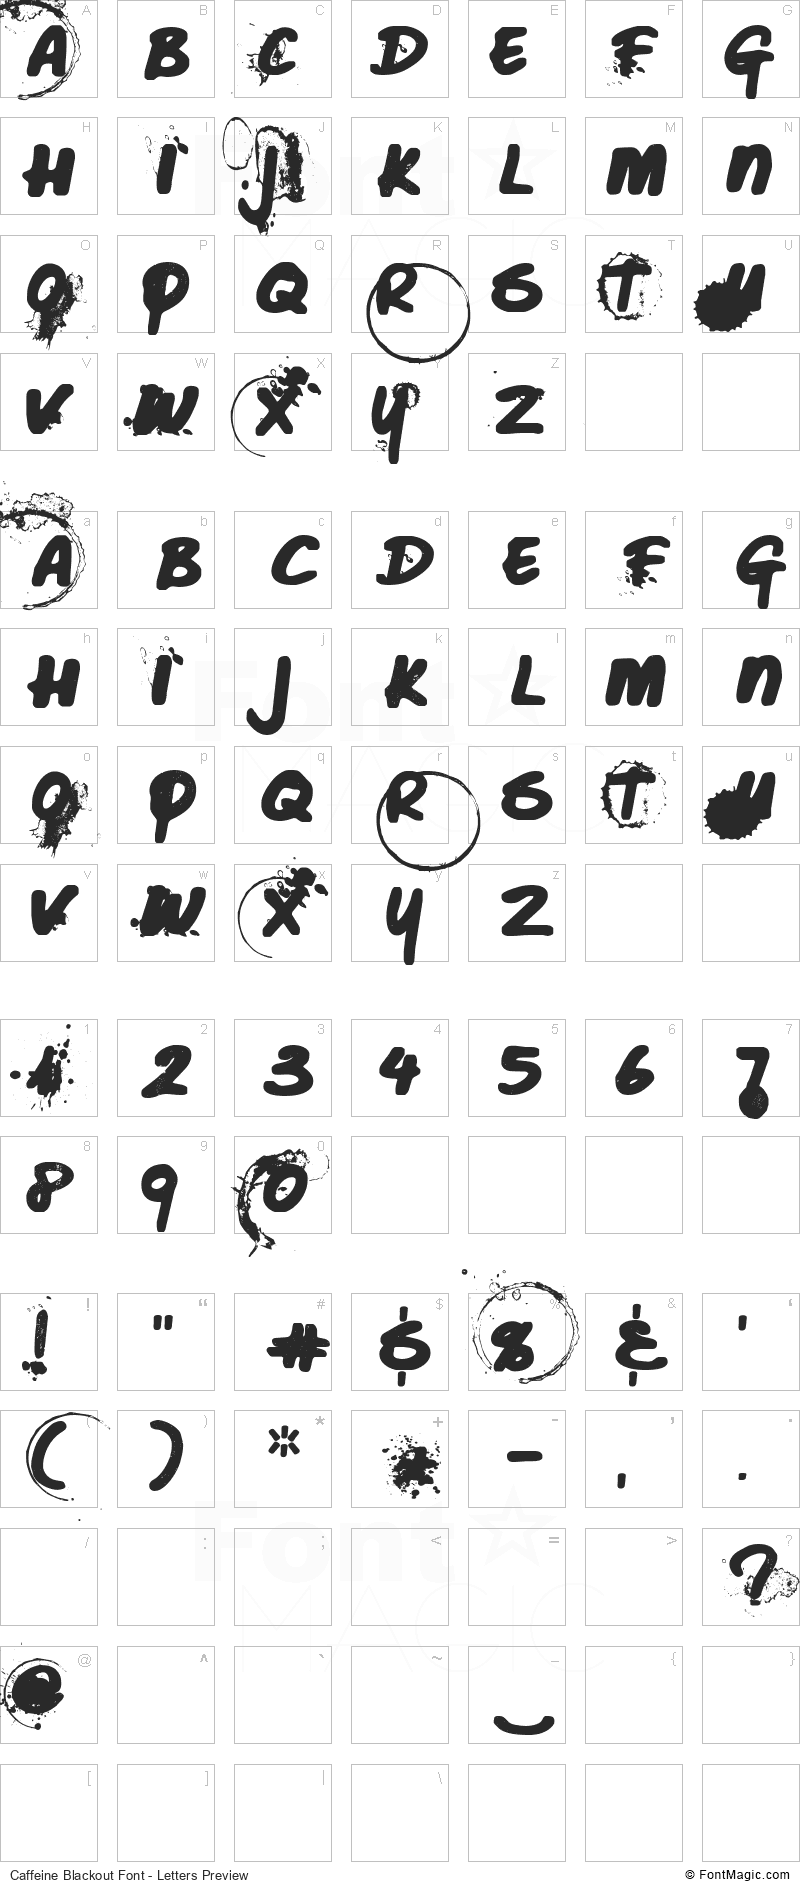 Caffeine Blackout Font - All Latters Preview Chart